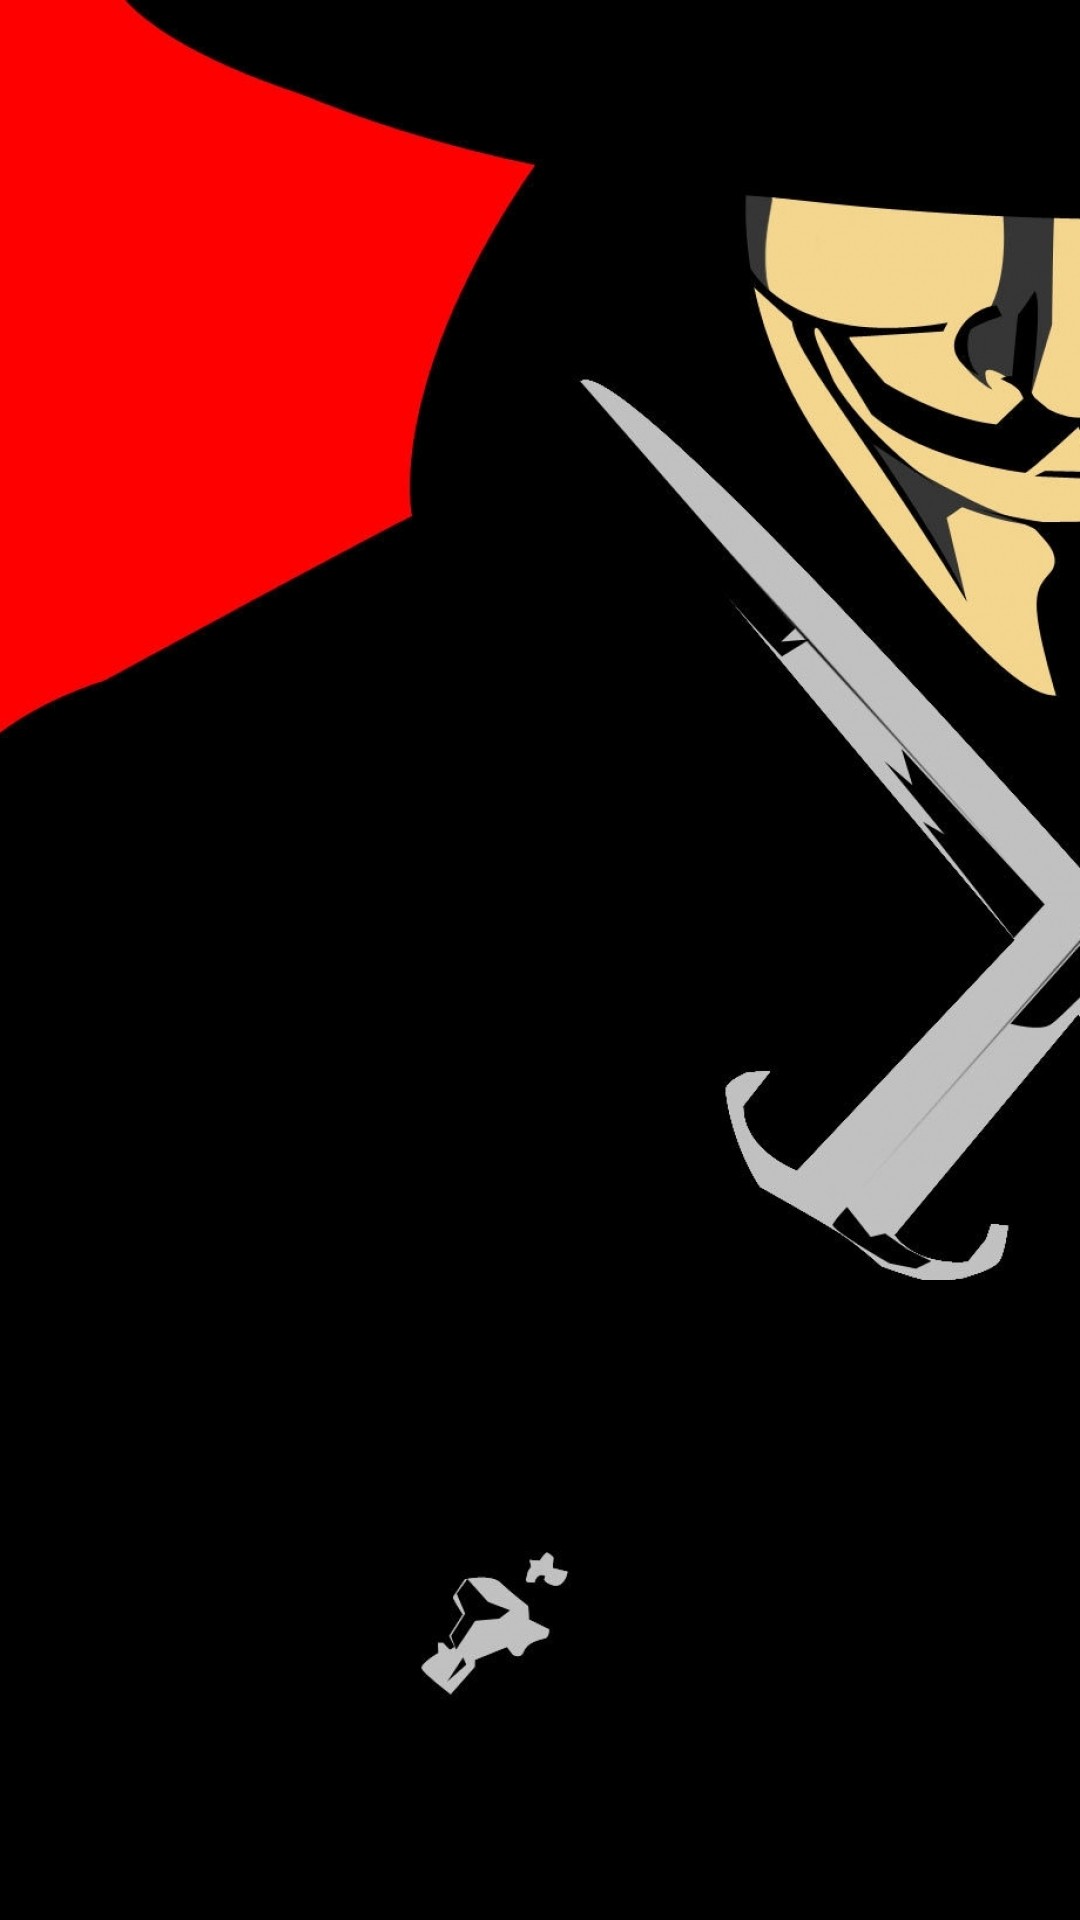 1080x1920 Search Results for “v for vendetta iphone 6 wallpaper” – Adorable Wallpapers